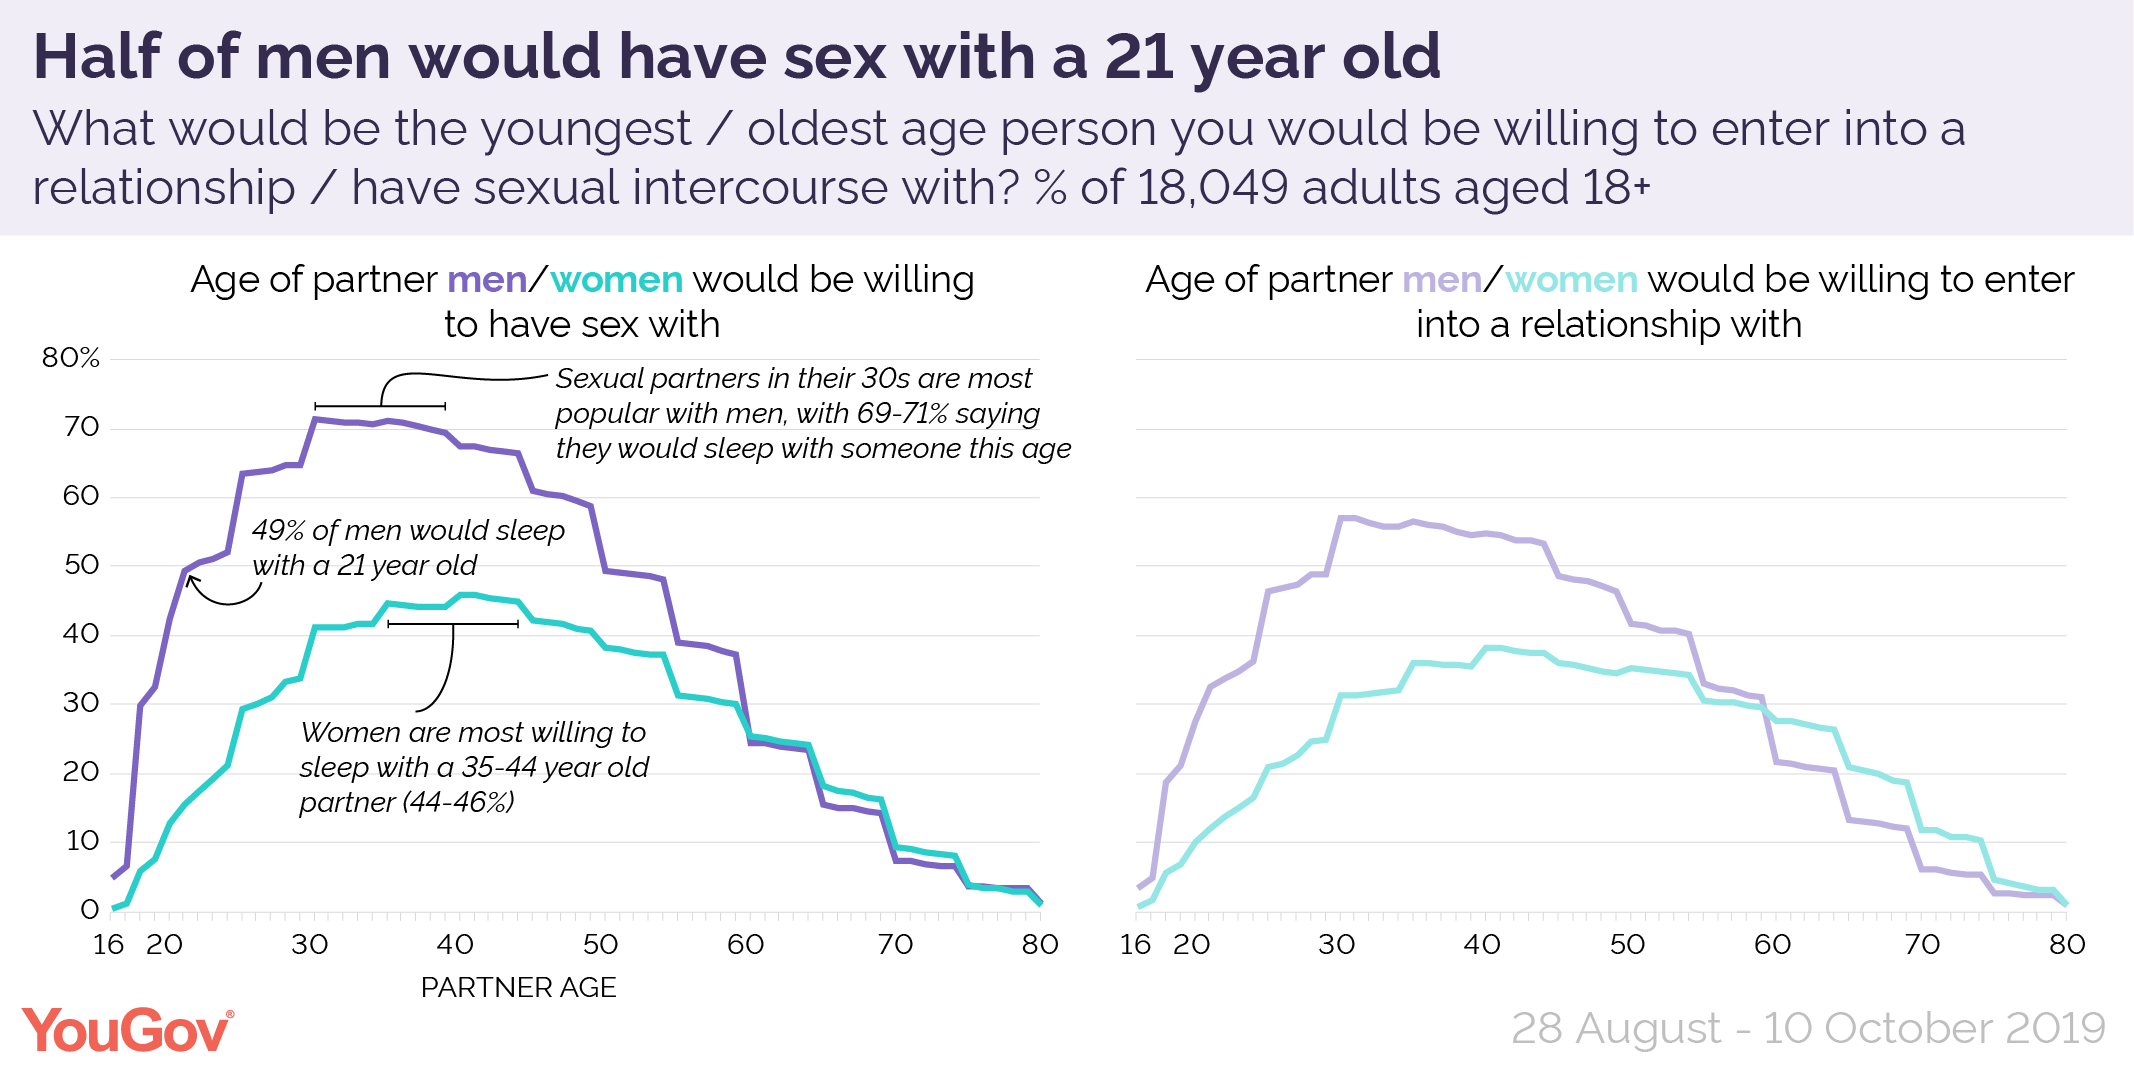 Half of men would have sex with a 21-year-old | YouGov